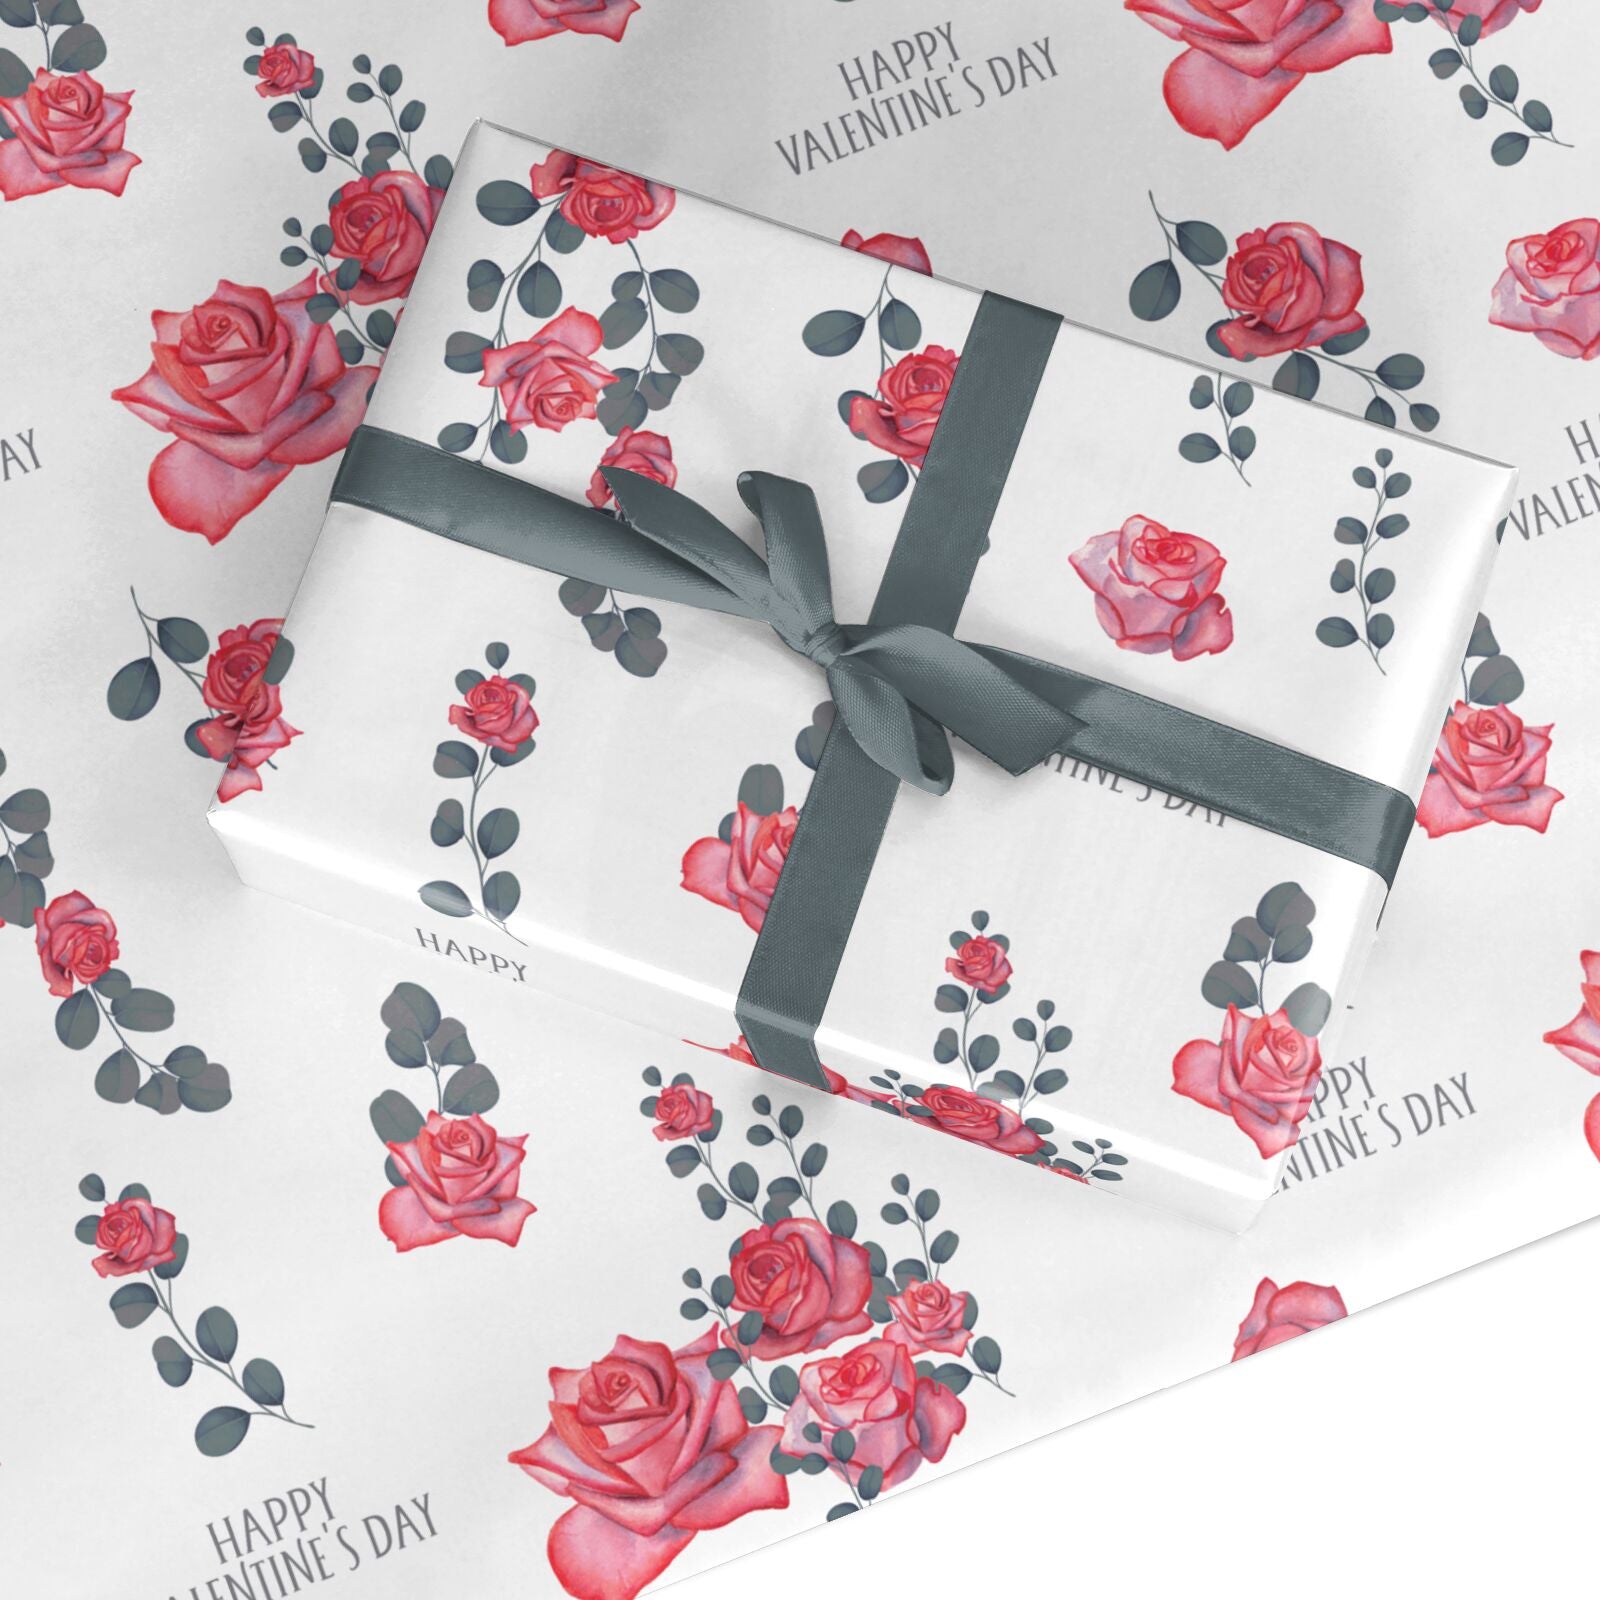 Flower Bouquet Wrapping Paper  Valentine's Day Paper Florist